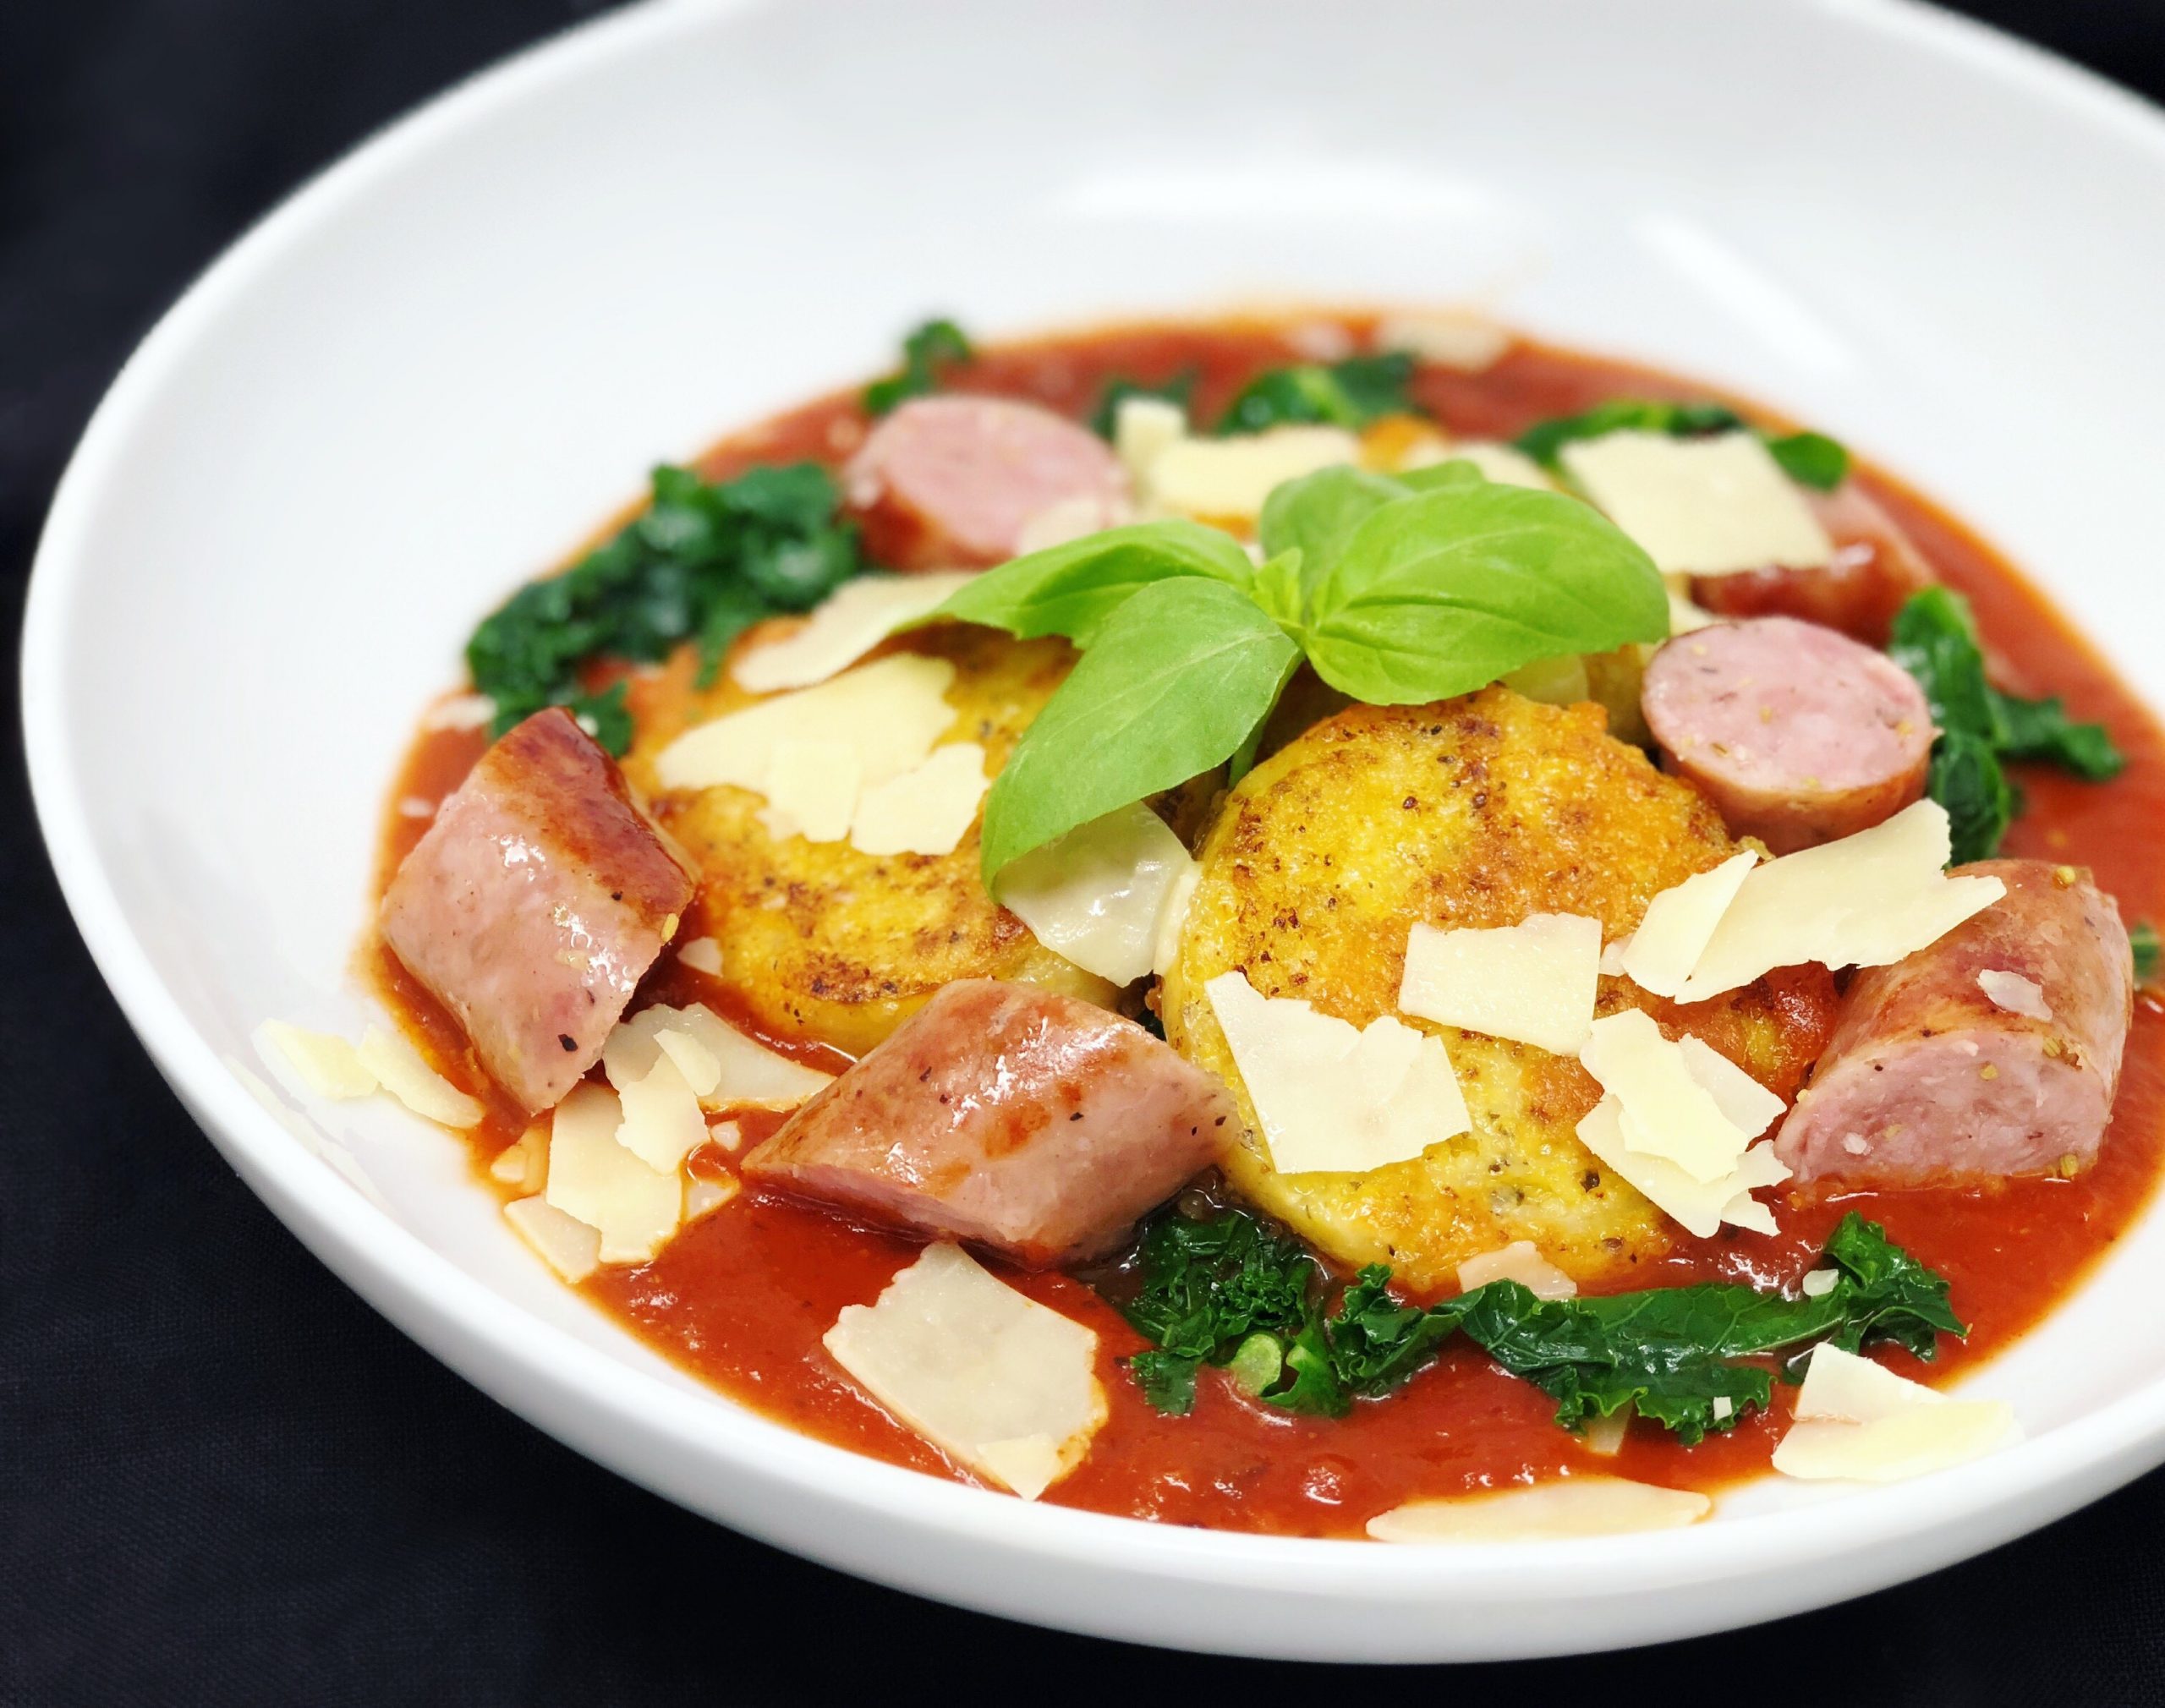 Dish of Parmesan Crusted Polenta with Kale and Sausage